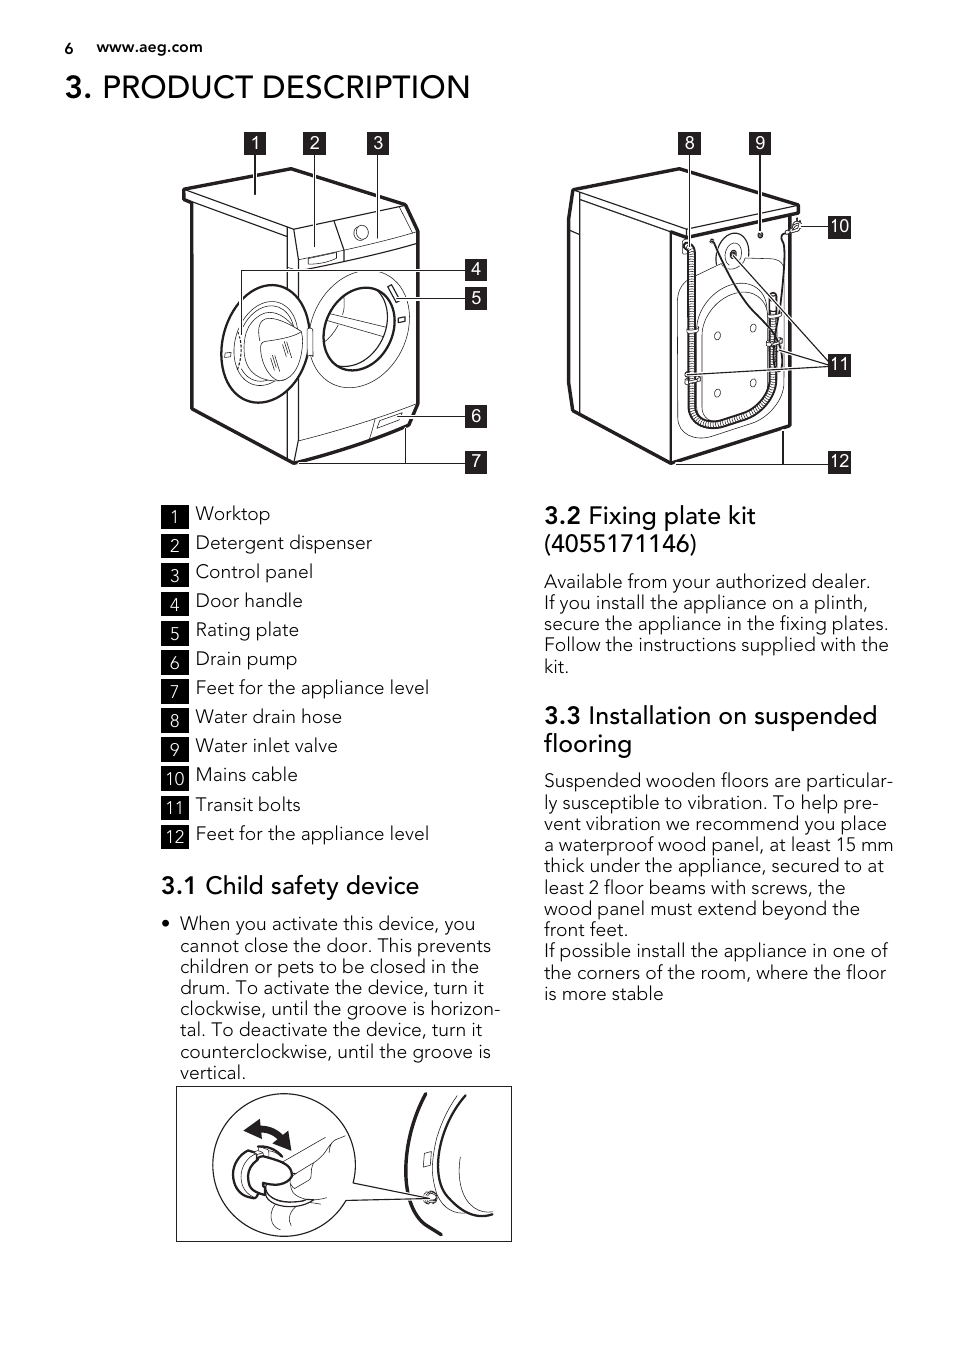 Product description, 1 child safety device, 3 installation on suspended  flooring | AEG L89499FL User Manual | Page 6 / 32